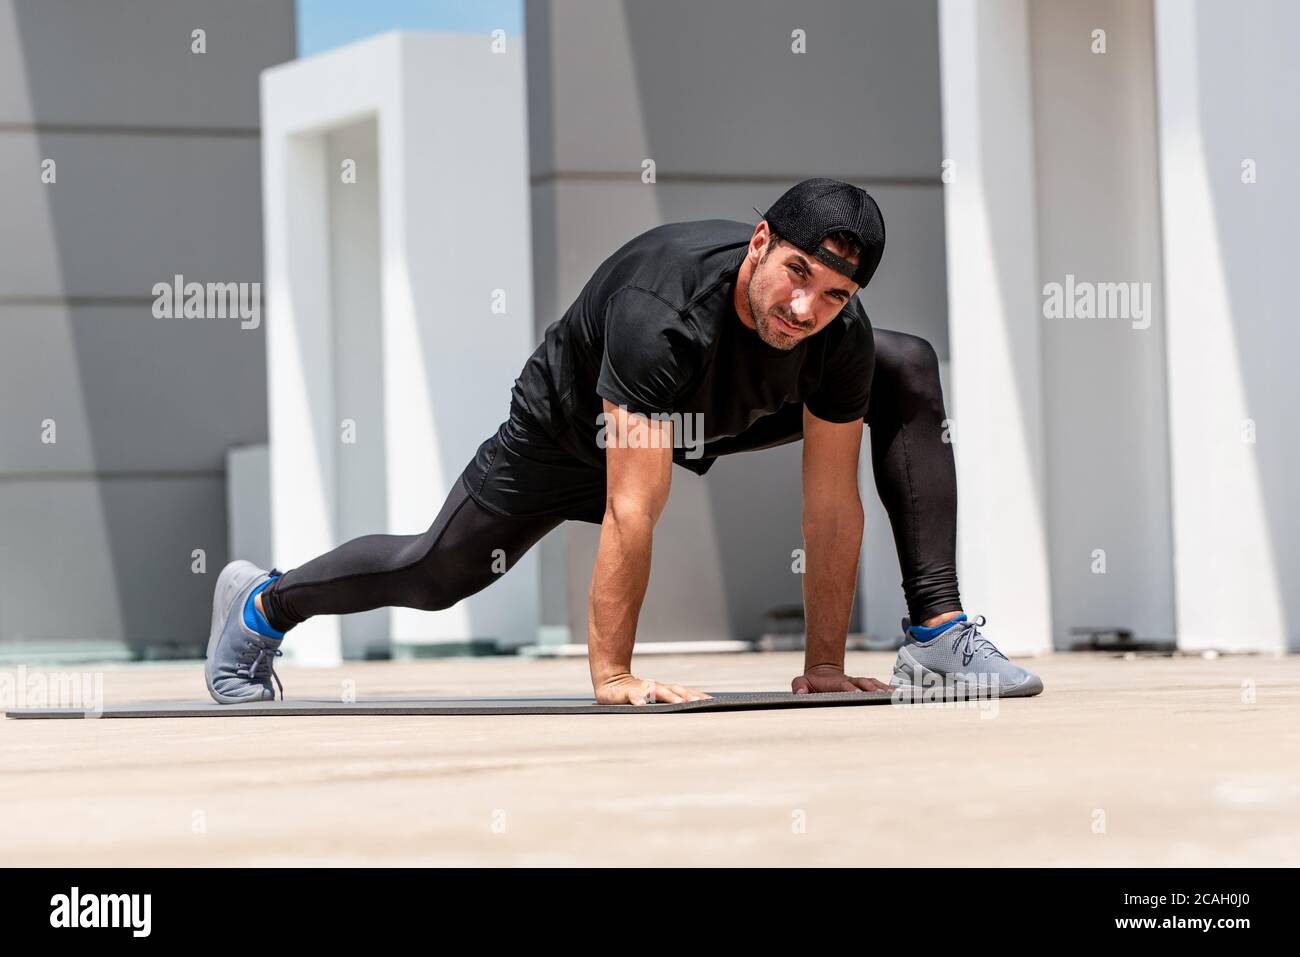 Fit handsome sports man warming up with spider lunge exercise outdoors on building rooftop floor Stock Photo